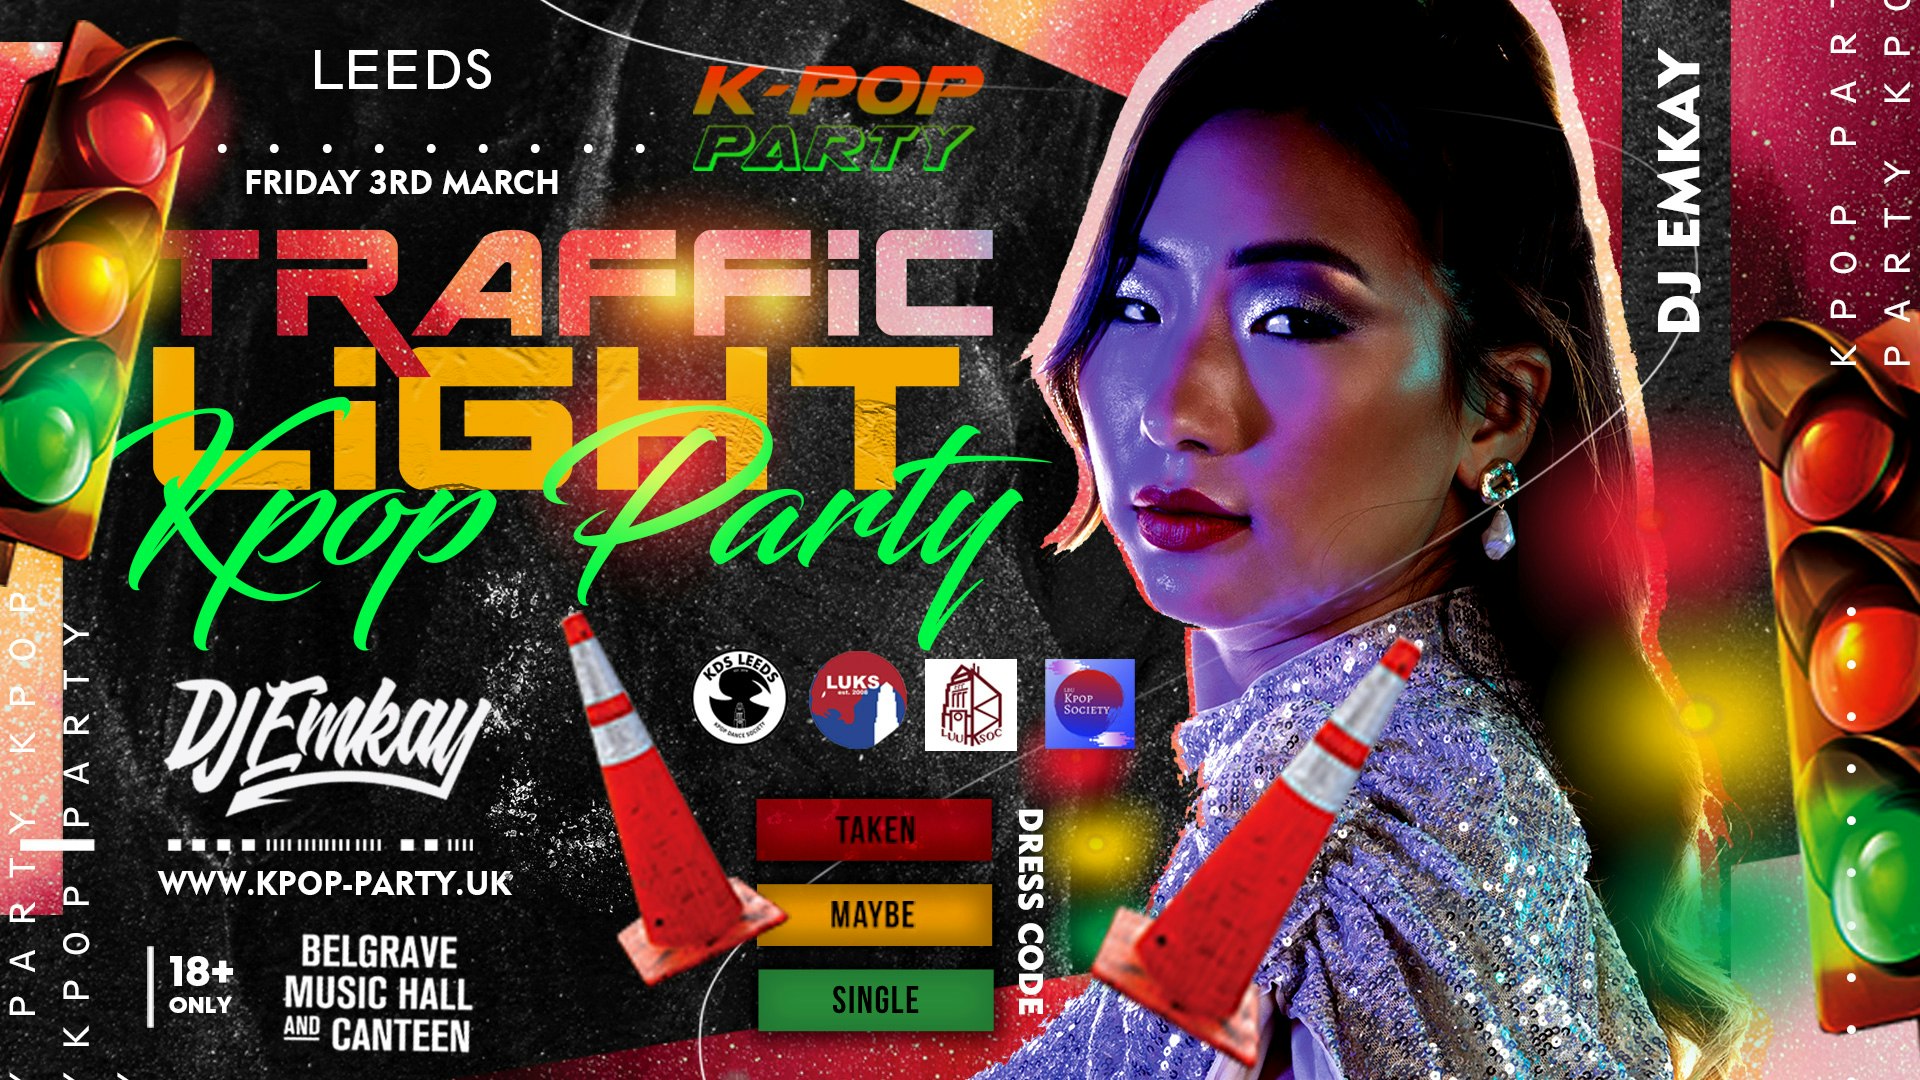 K-Pop Traffic Light Party Leeds with DJ EMKAY | Friday 3rd March